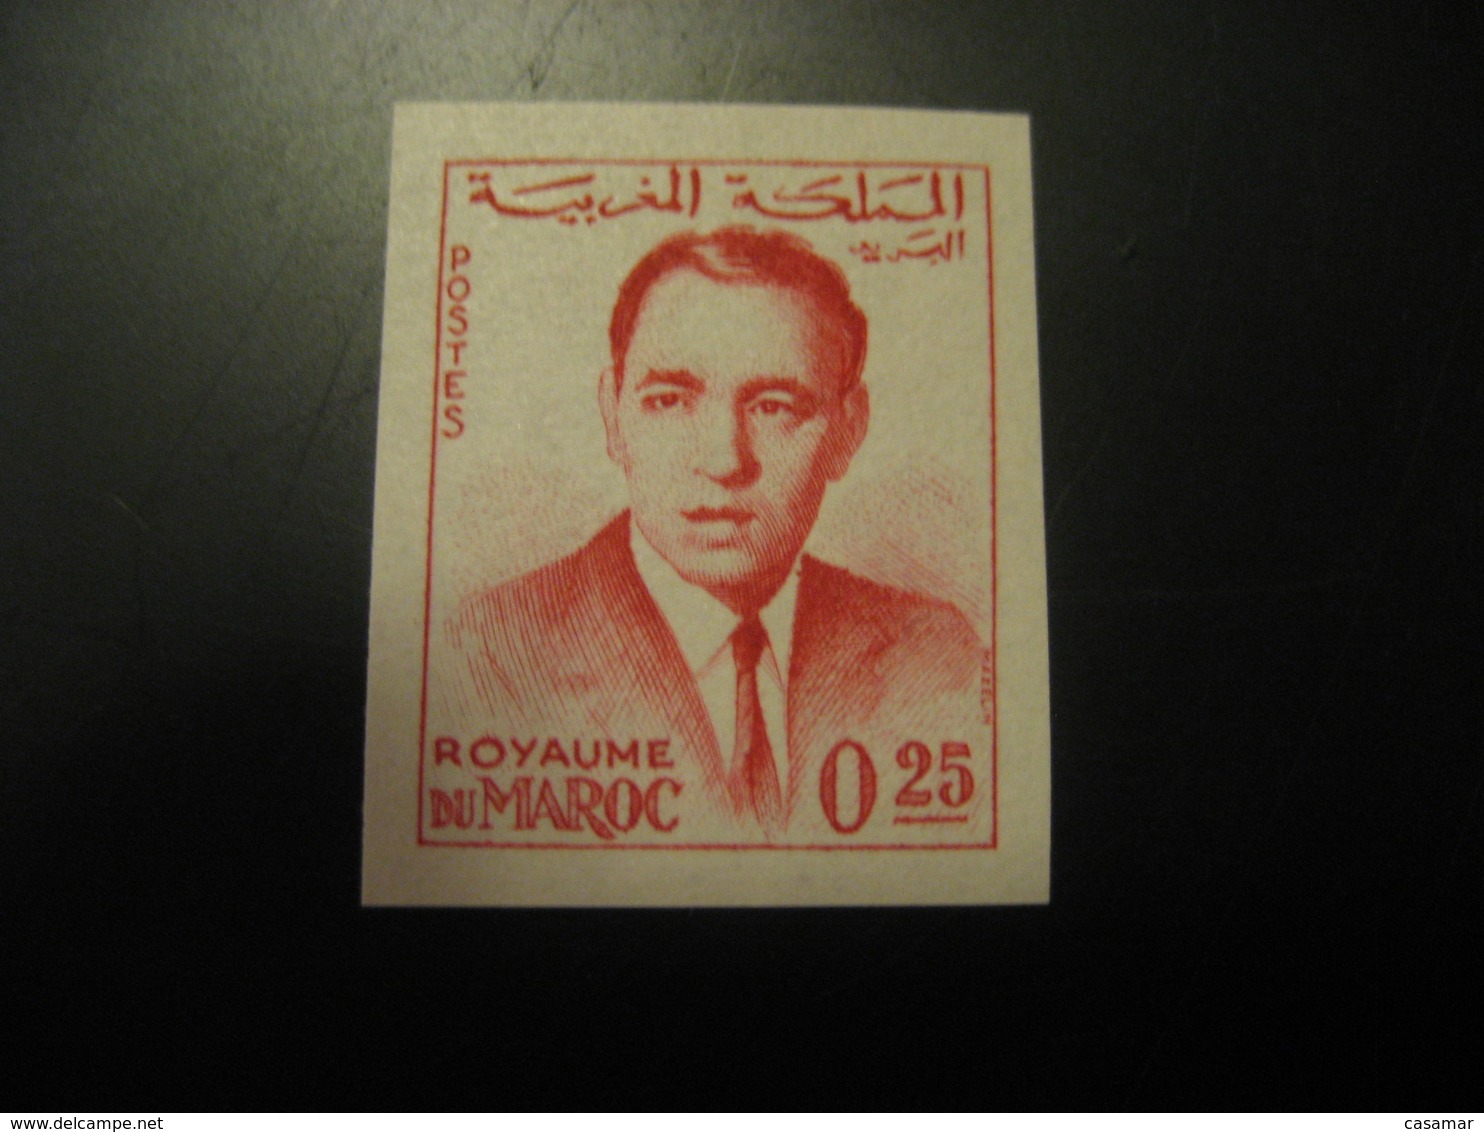 Royaume Du Maroc 0,25 King Imperforated Stamp Proof MOROCCO - Morocco (1956-...)